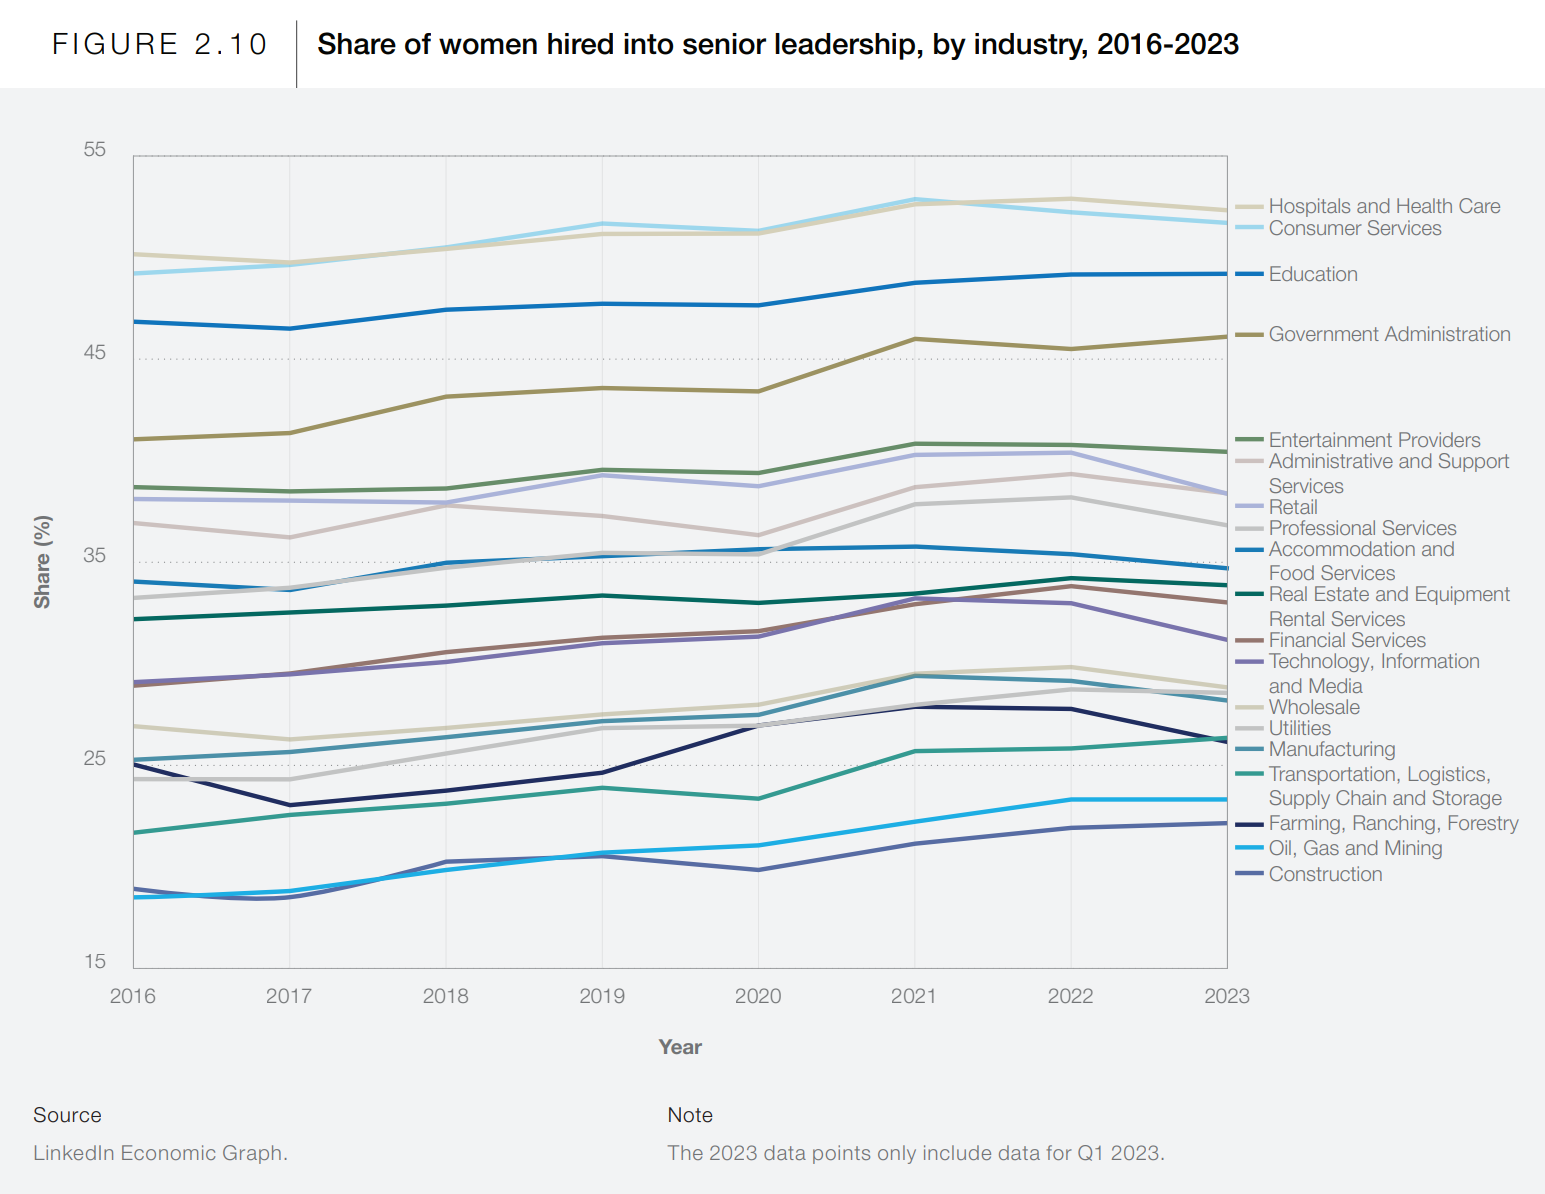 Share of women hired into senior leadership, by industry, 2016-2023. Estimates by LinkedIn show that as of May 2023, the proportion of women hired into leadership is lower than what would be predicted based on the pre-2022 trend line for most industries, apart from Construction; Real Estate; Oil, Gas and Mining; Education; and Agriculture, which continue to stay on trend. The most affected industries are Technology and Professional Services, which in May 2023 was 4 percentage points below trend, and Entertainment Providers and Wholesale, which were 3 percentage points below trend. Data: LinkedIn Economic Graph. Graphic: World Economic Forum